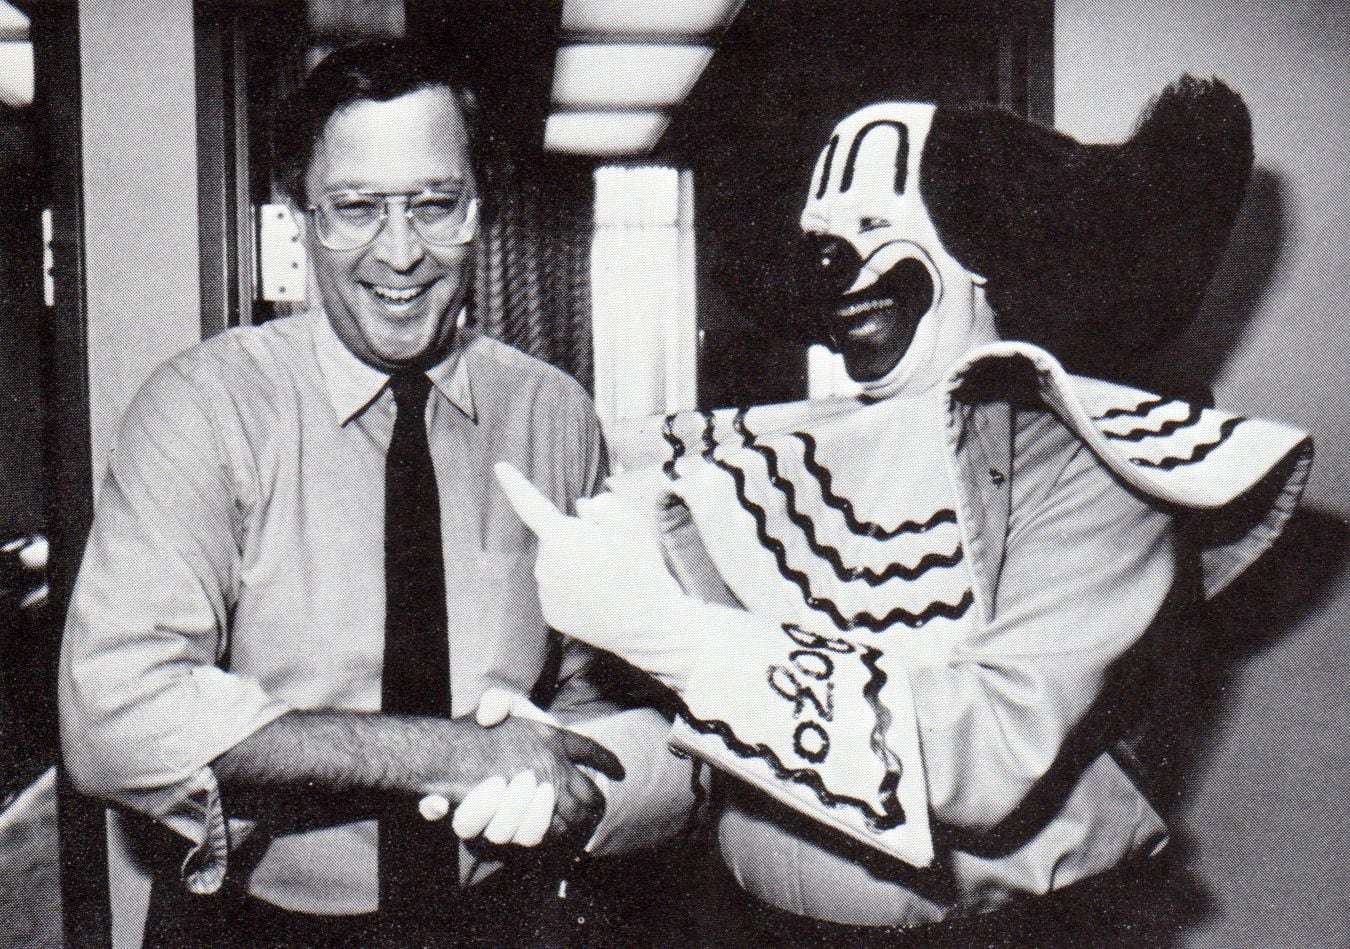 In 1984, Bozo the Clown paid a surprise visit to Ralph Langer during a campaign stopover in Dallas.